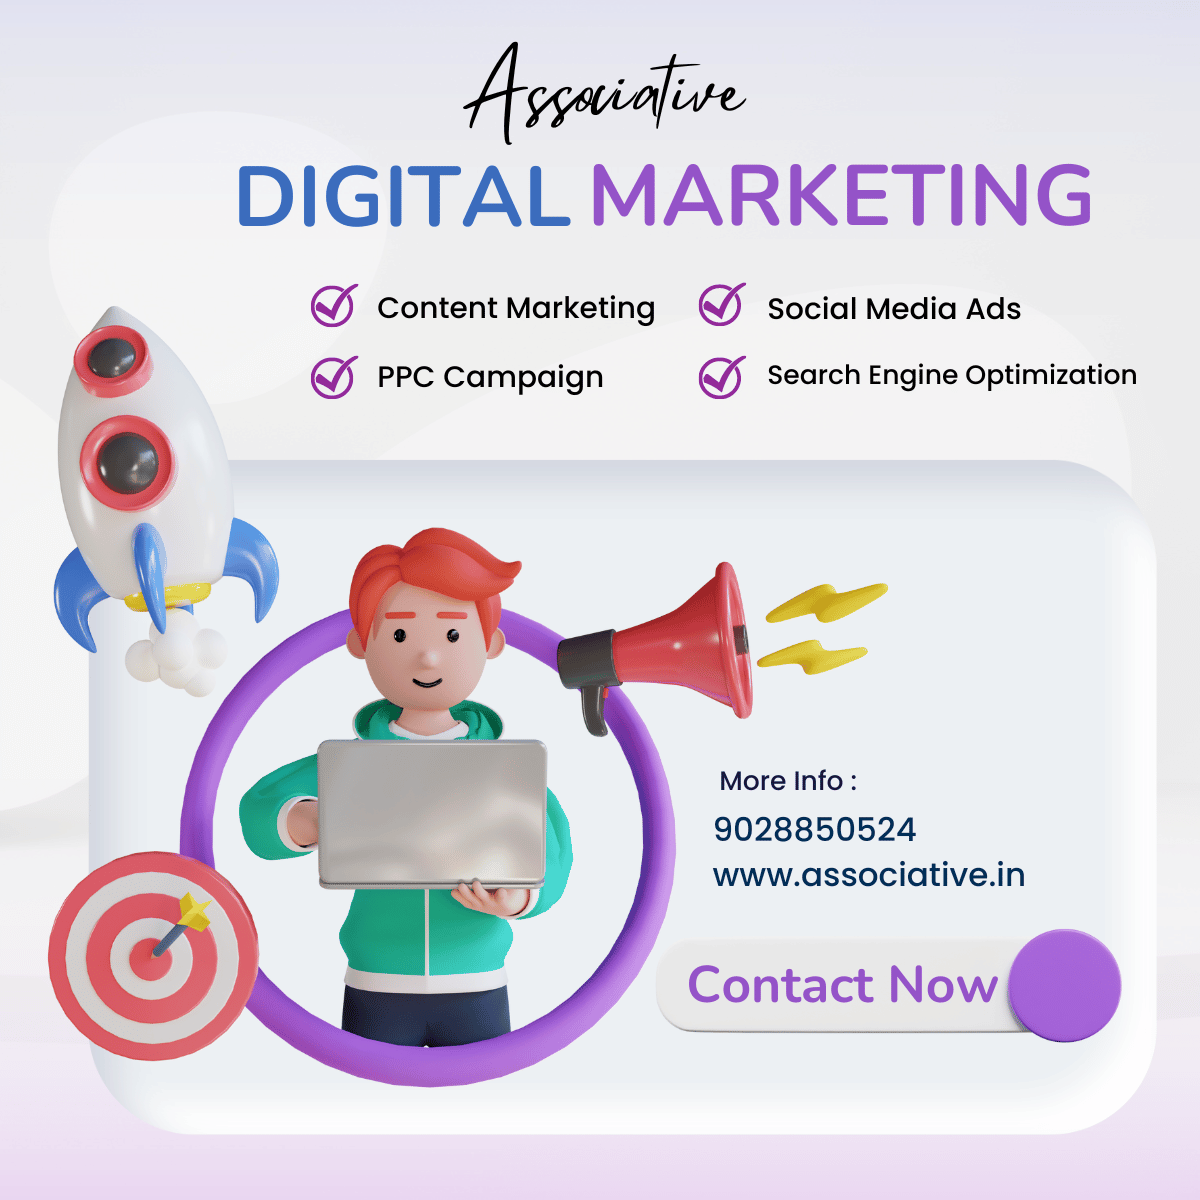 Associative - Your Pune Partner in Online Marketing Mastery